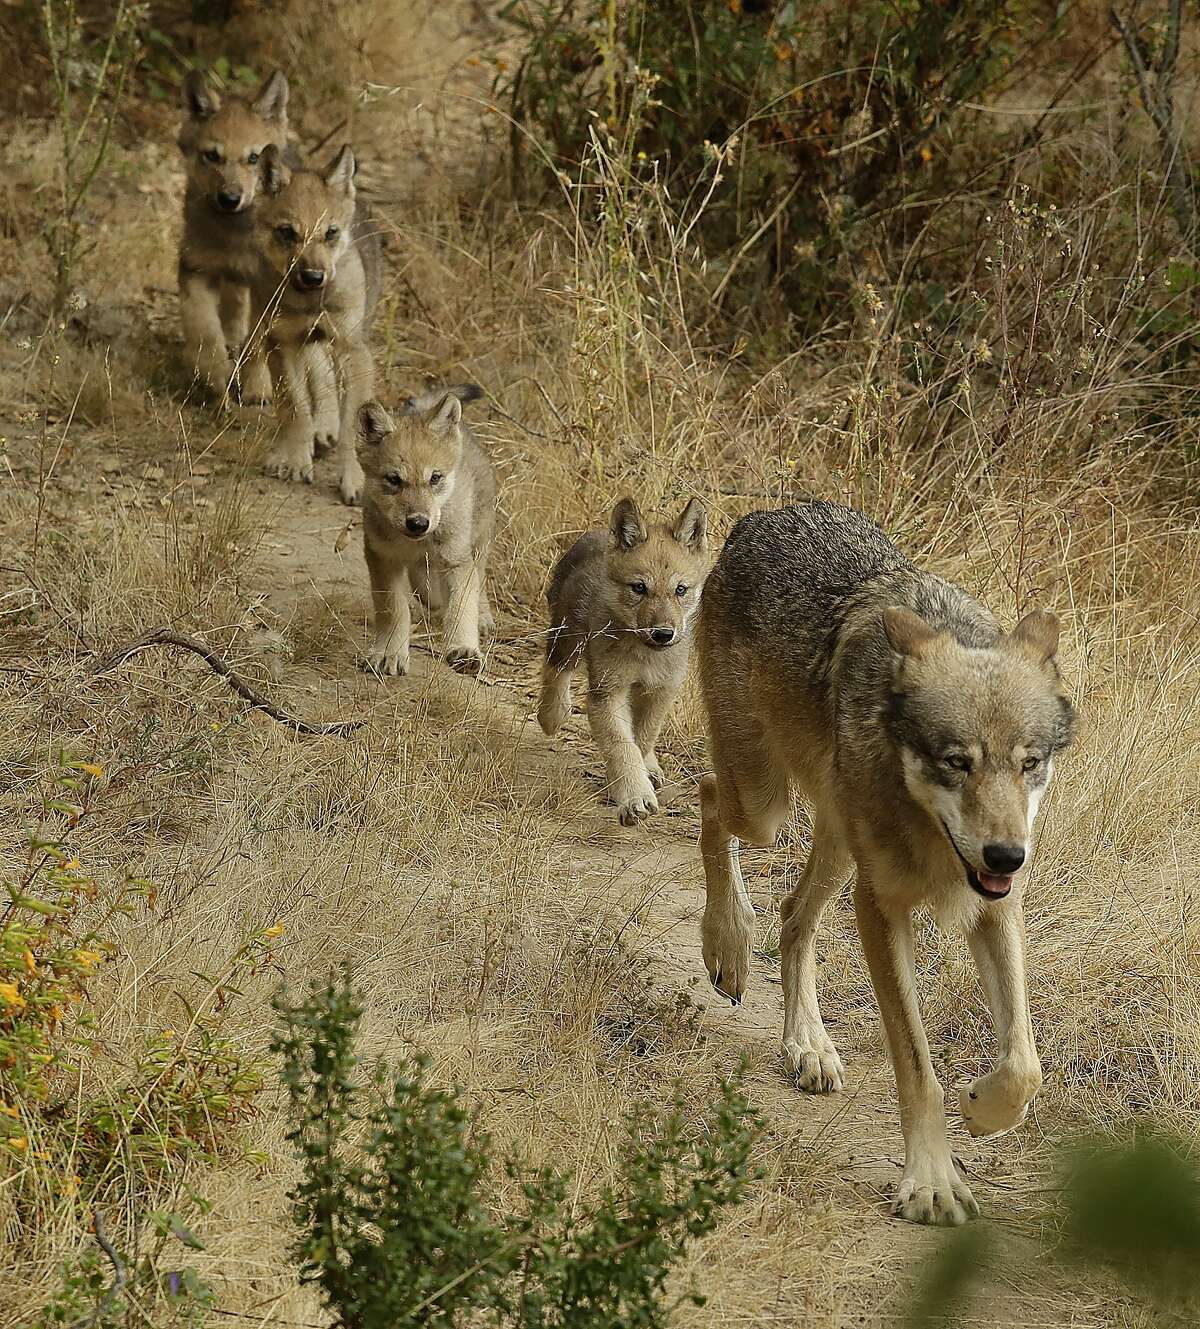 Sequoia, a male grey wolf, leads his four pups to explore their habitat at the Oakland Zoo in Oakland, Calif., Monday, July 1, 2019. The four new gray wolf pups have come out of their den at the Oakland Zoo. The pups were born on May 13. This month, the 6-week-old pups have started to explore the two-acre habitat. (AP Photo/Ben Margot)